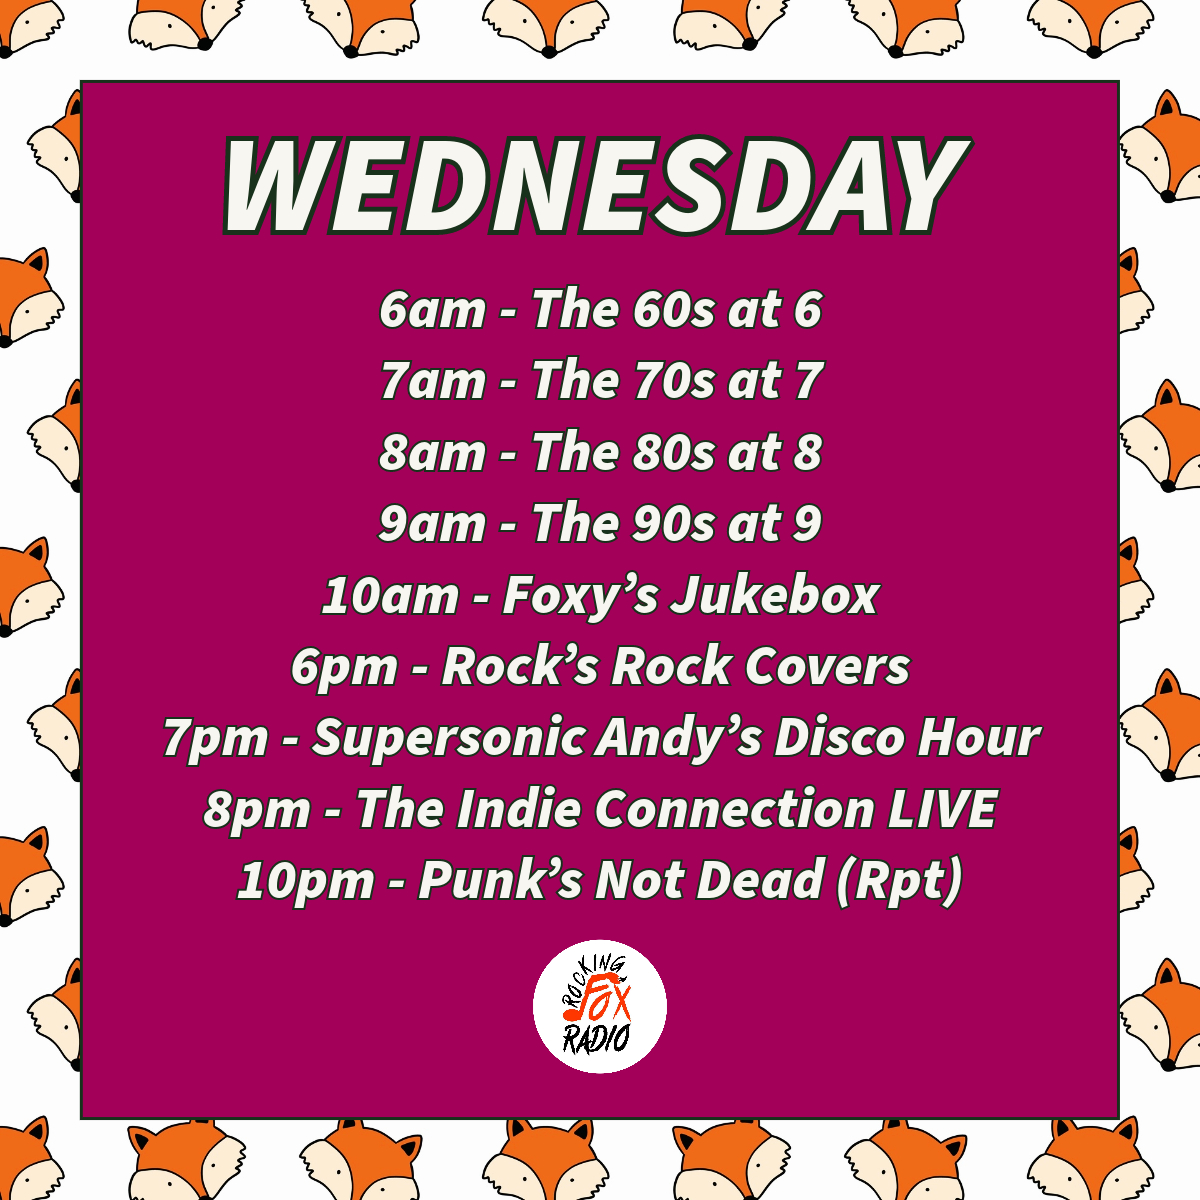 It's Wednesday and Foxy's got a great day of shows for you once more - Foxy's Jukebox keeps you company during the day, with the Rock Meister back at 6pm, Supersonic Andy at 7pm, @indiechris78 is LIVE at 8pm with another Indie Connection and Punk's Not Dead at 10pm.